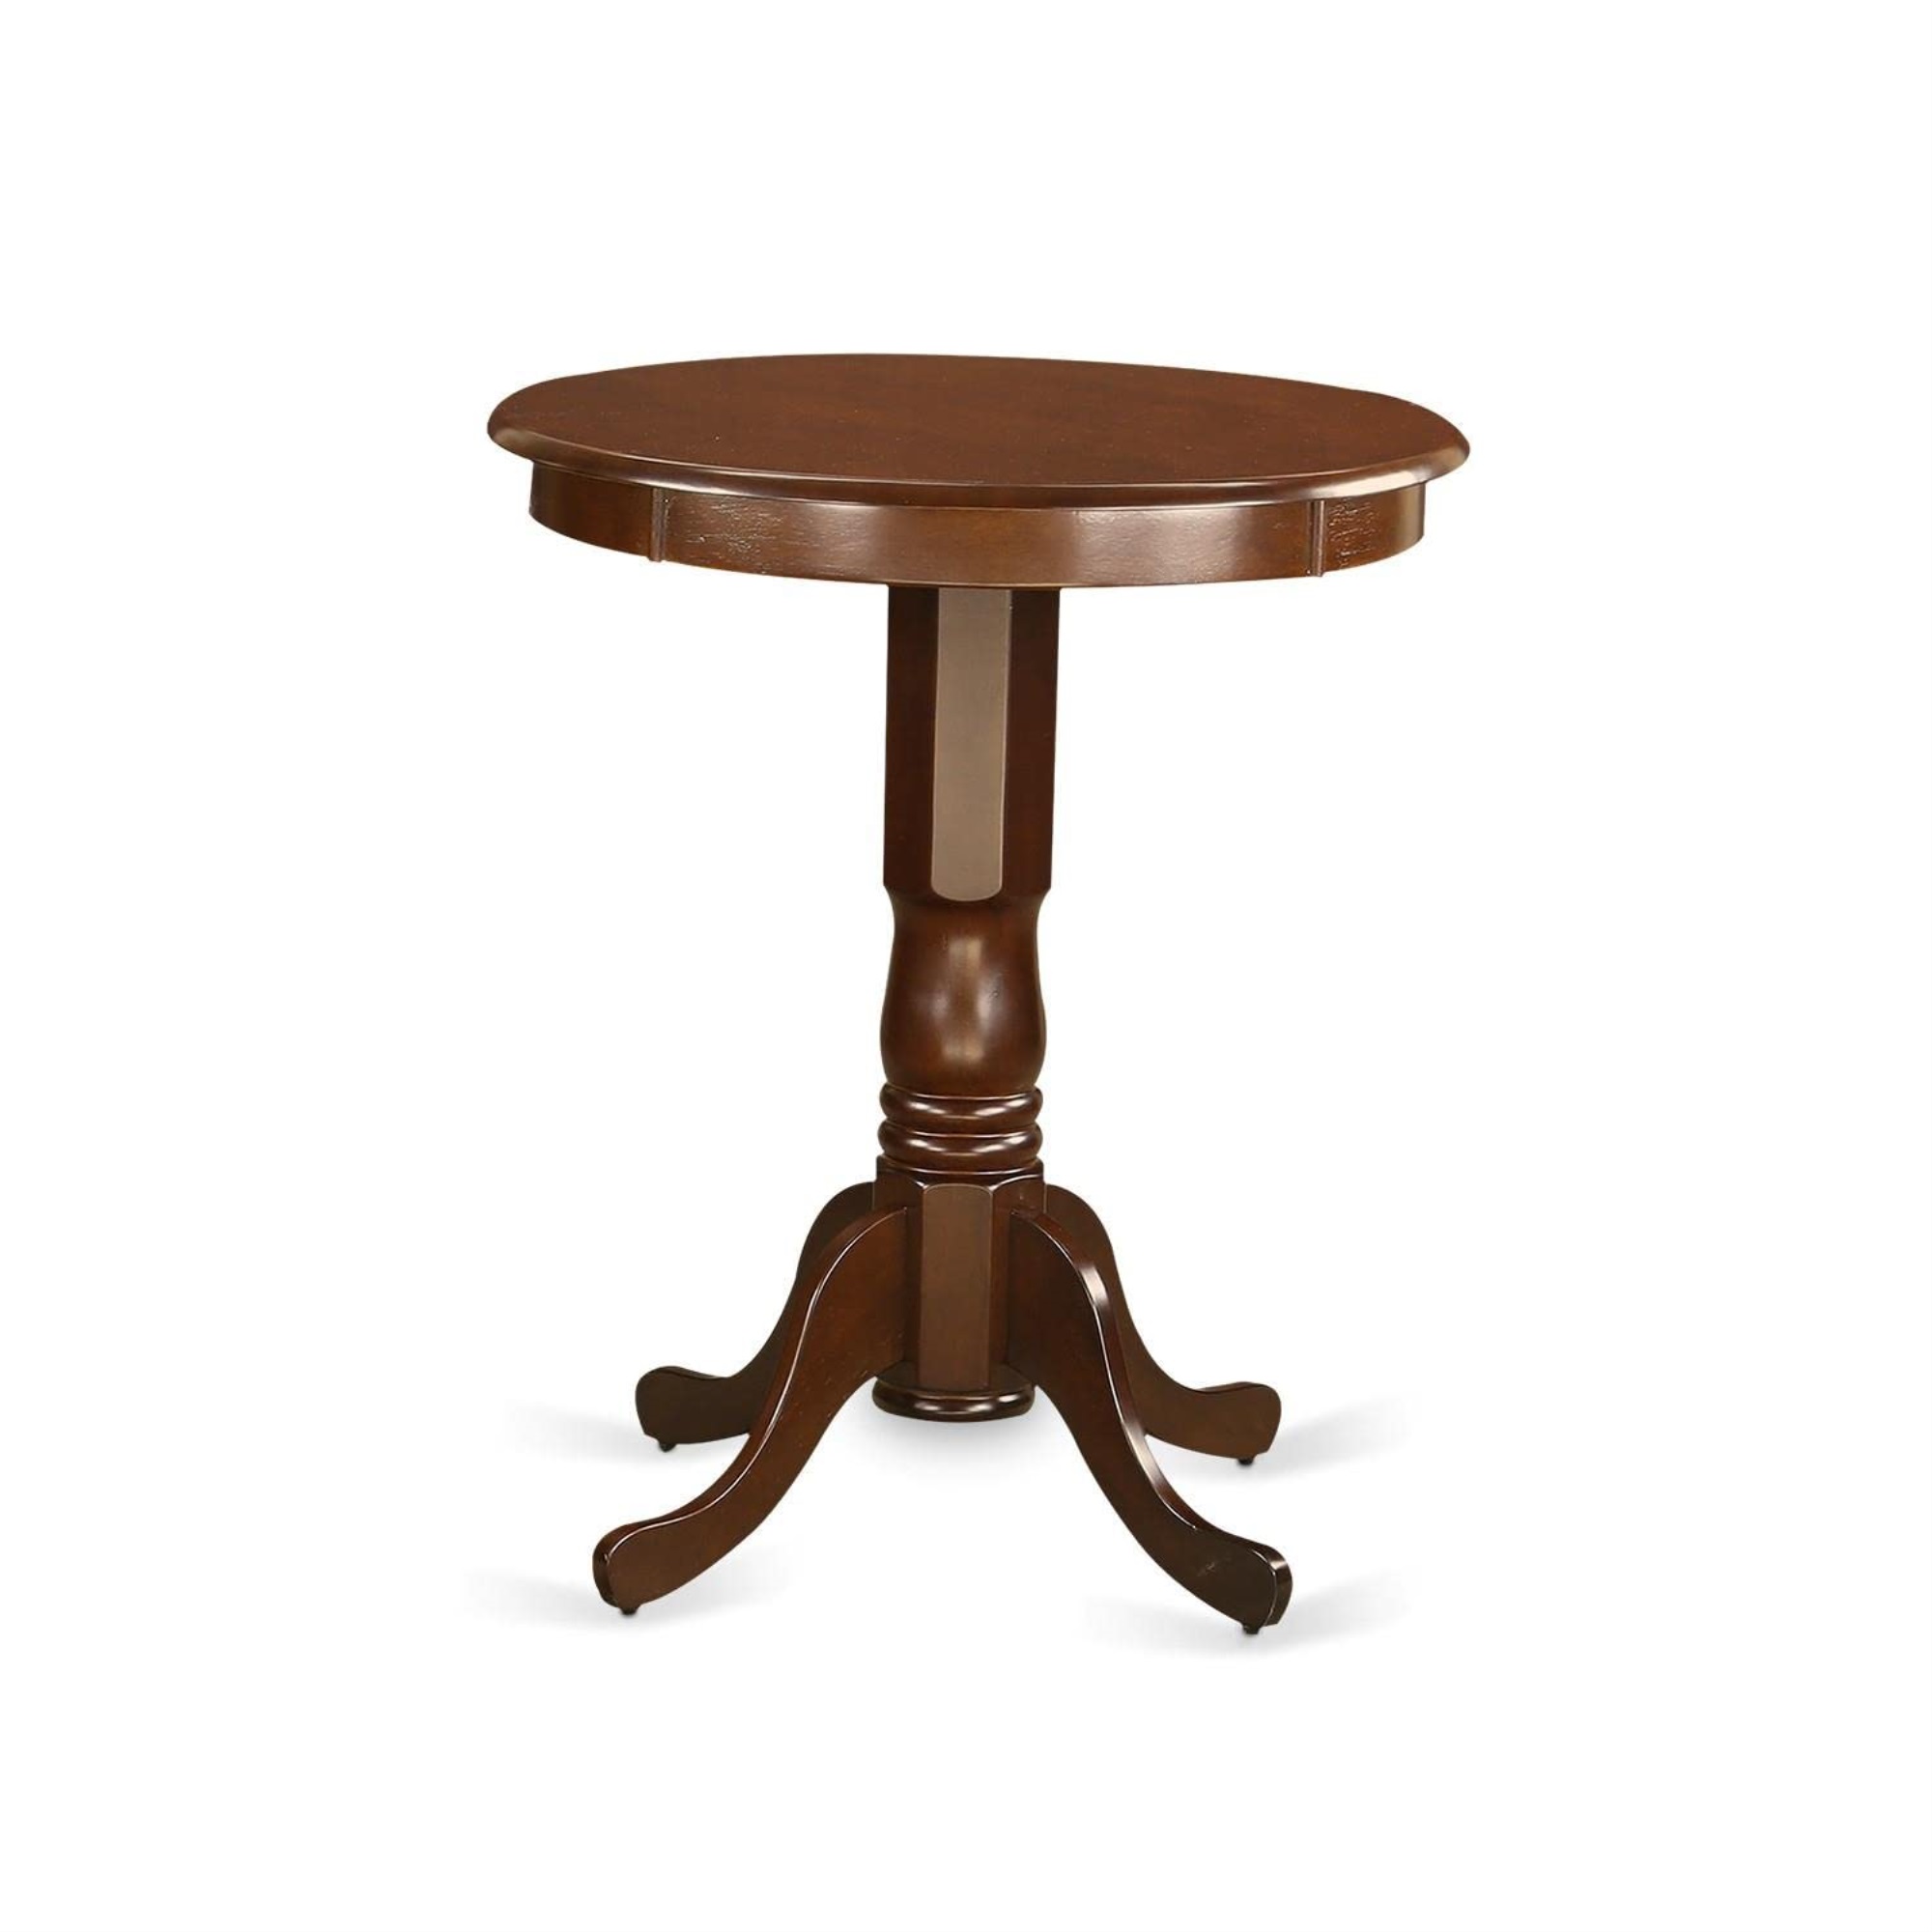 East West Furniture Eden  round  counter  height  table  finished  in  mahogany